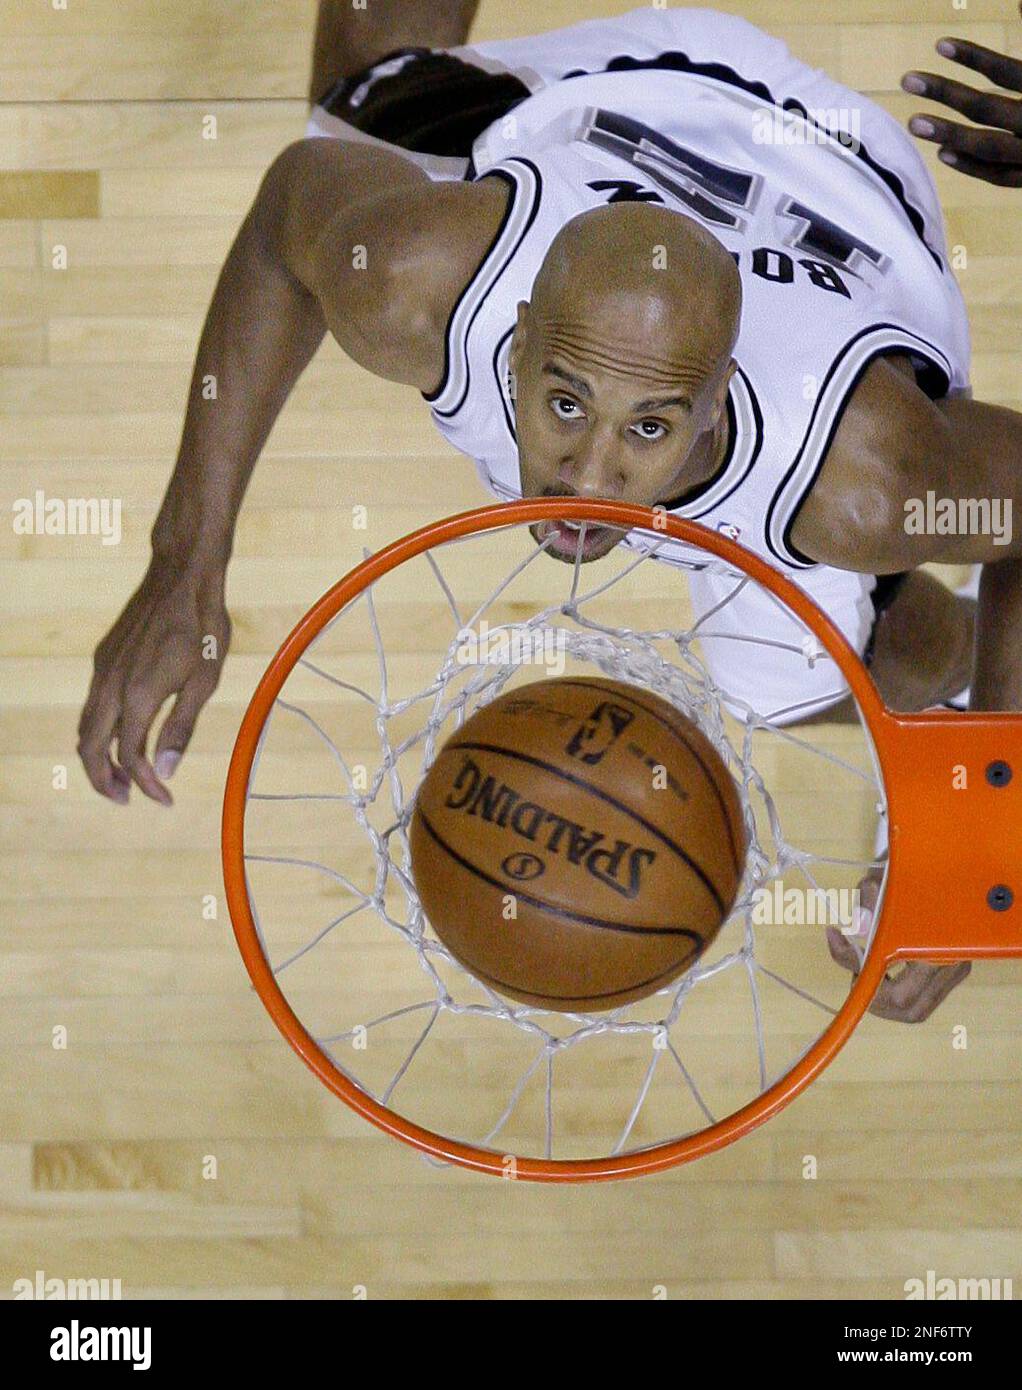 Spurs to Retire Bruce Bowen's No. 12 Jersey on March 21